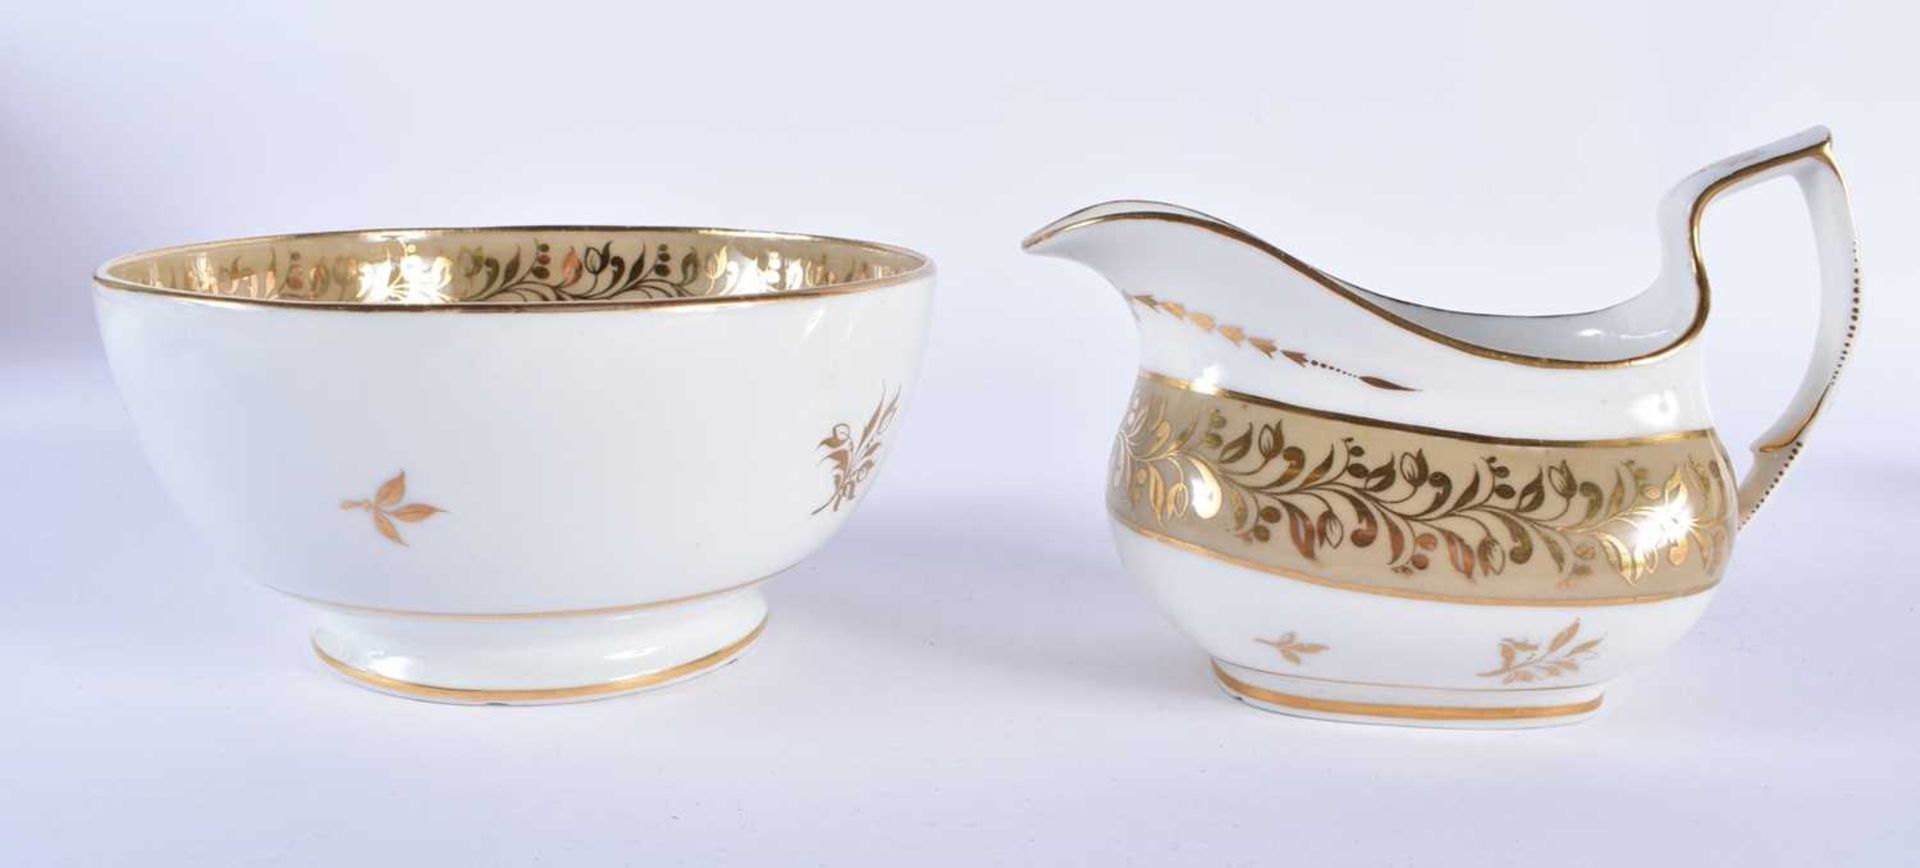 A LATE 18TH/19TH CENTURY CHAMBERLAINS WORCESTER GILT PAINTED TEAWARES. Largest 8 cm x 15 cm. (qty) - Image 8 of 13